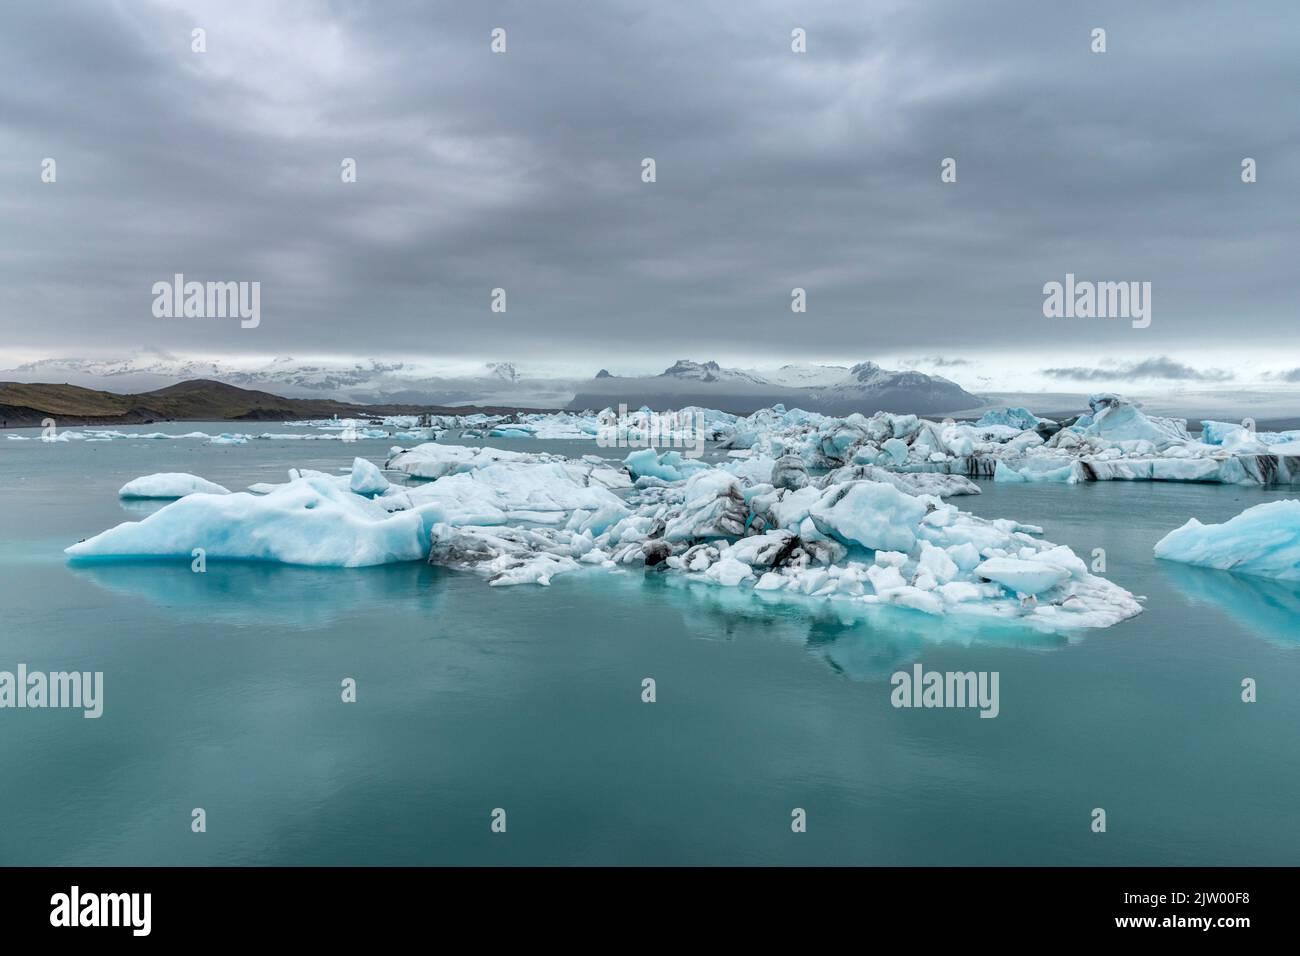 Icebergs floating in the glacial lagoon at Jökulsárlón in the Vatnajökull National Park of southern Iceland. Stock Photo